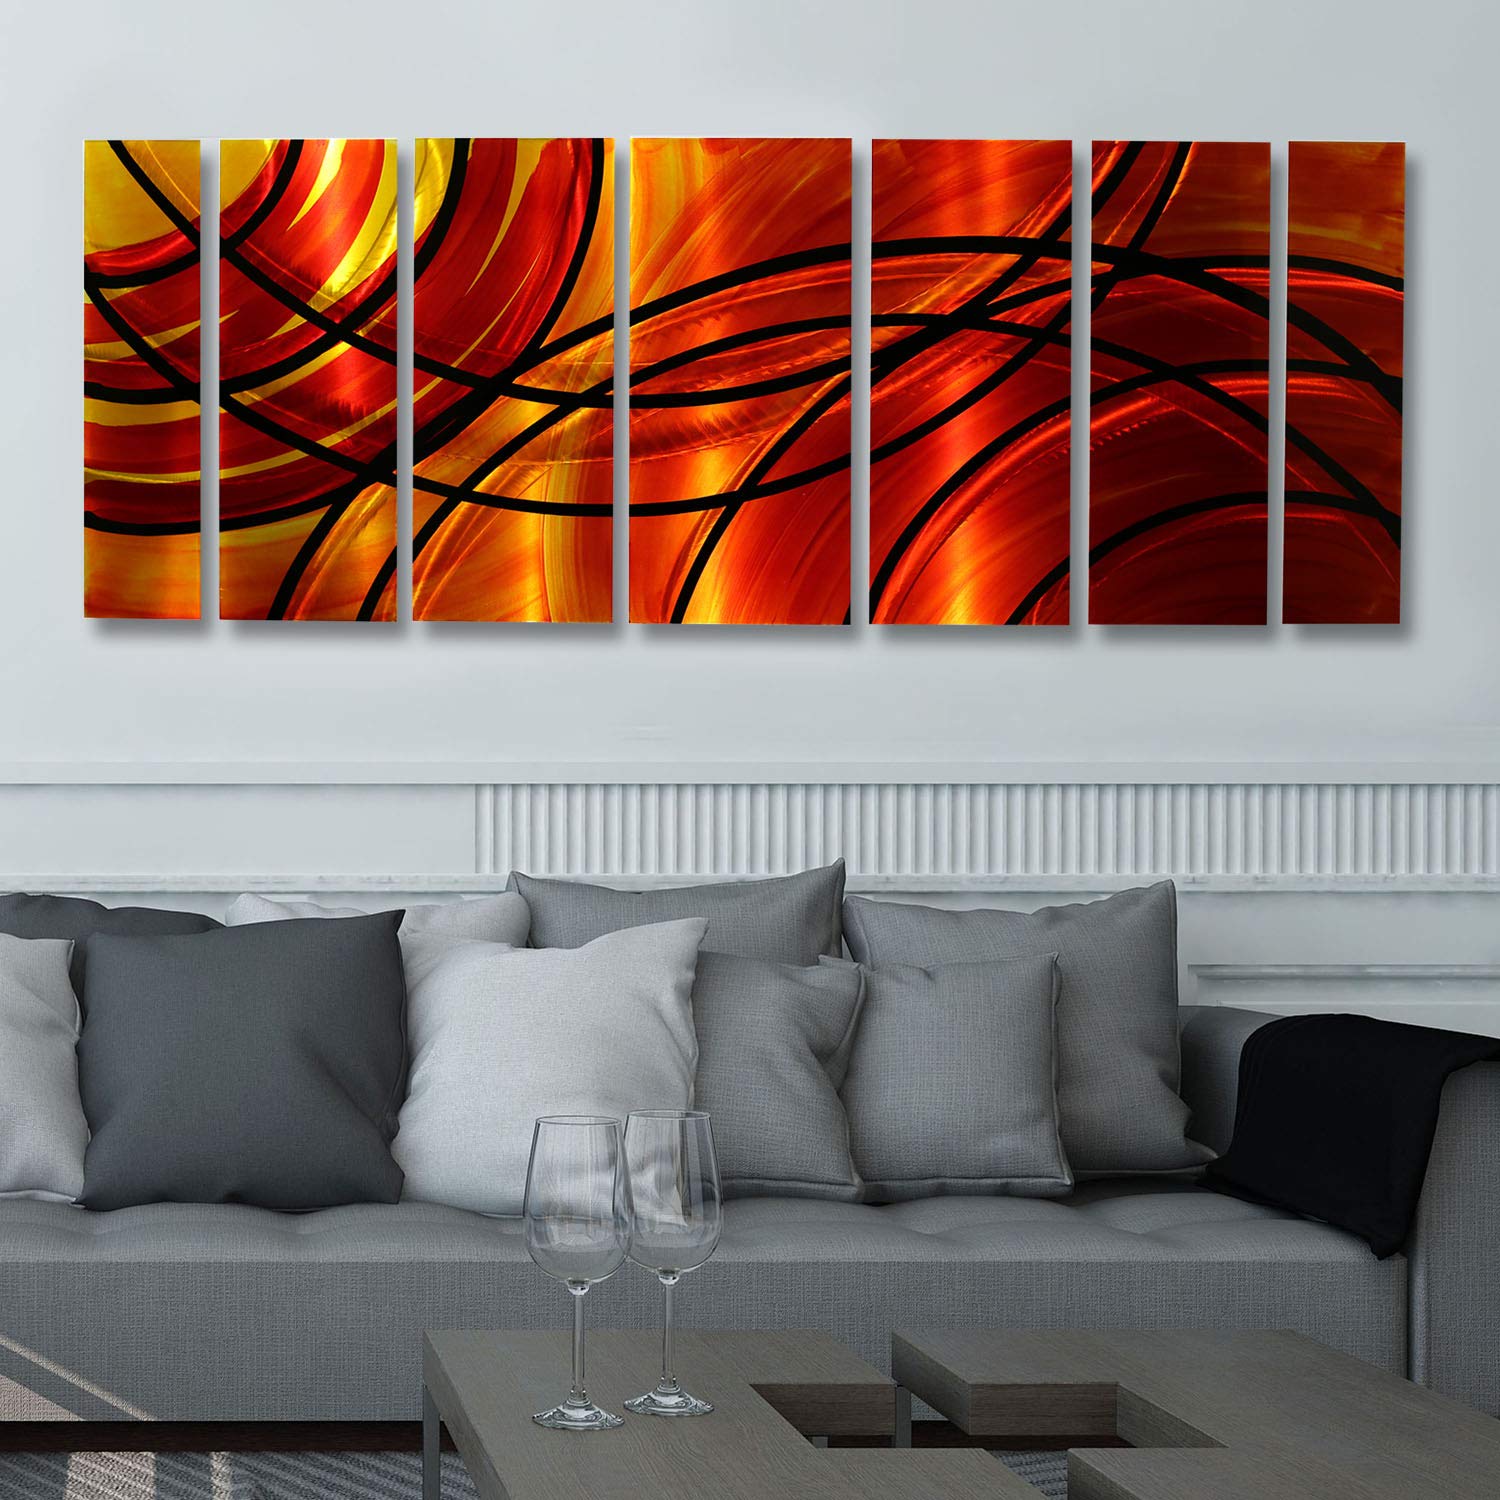 Red, Orange, Gold & Black Abstract Metal Wall Art Painting - Contemporary Handcrafted Home Decor Art Sculpture - Bound By Fire By Jon Allen